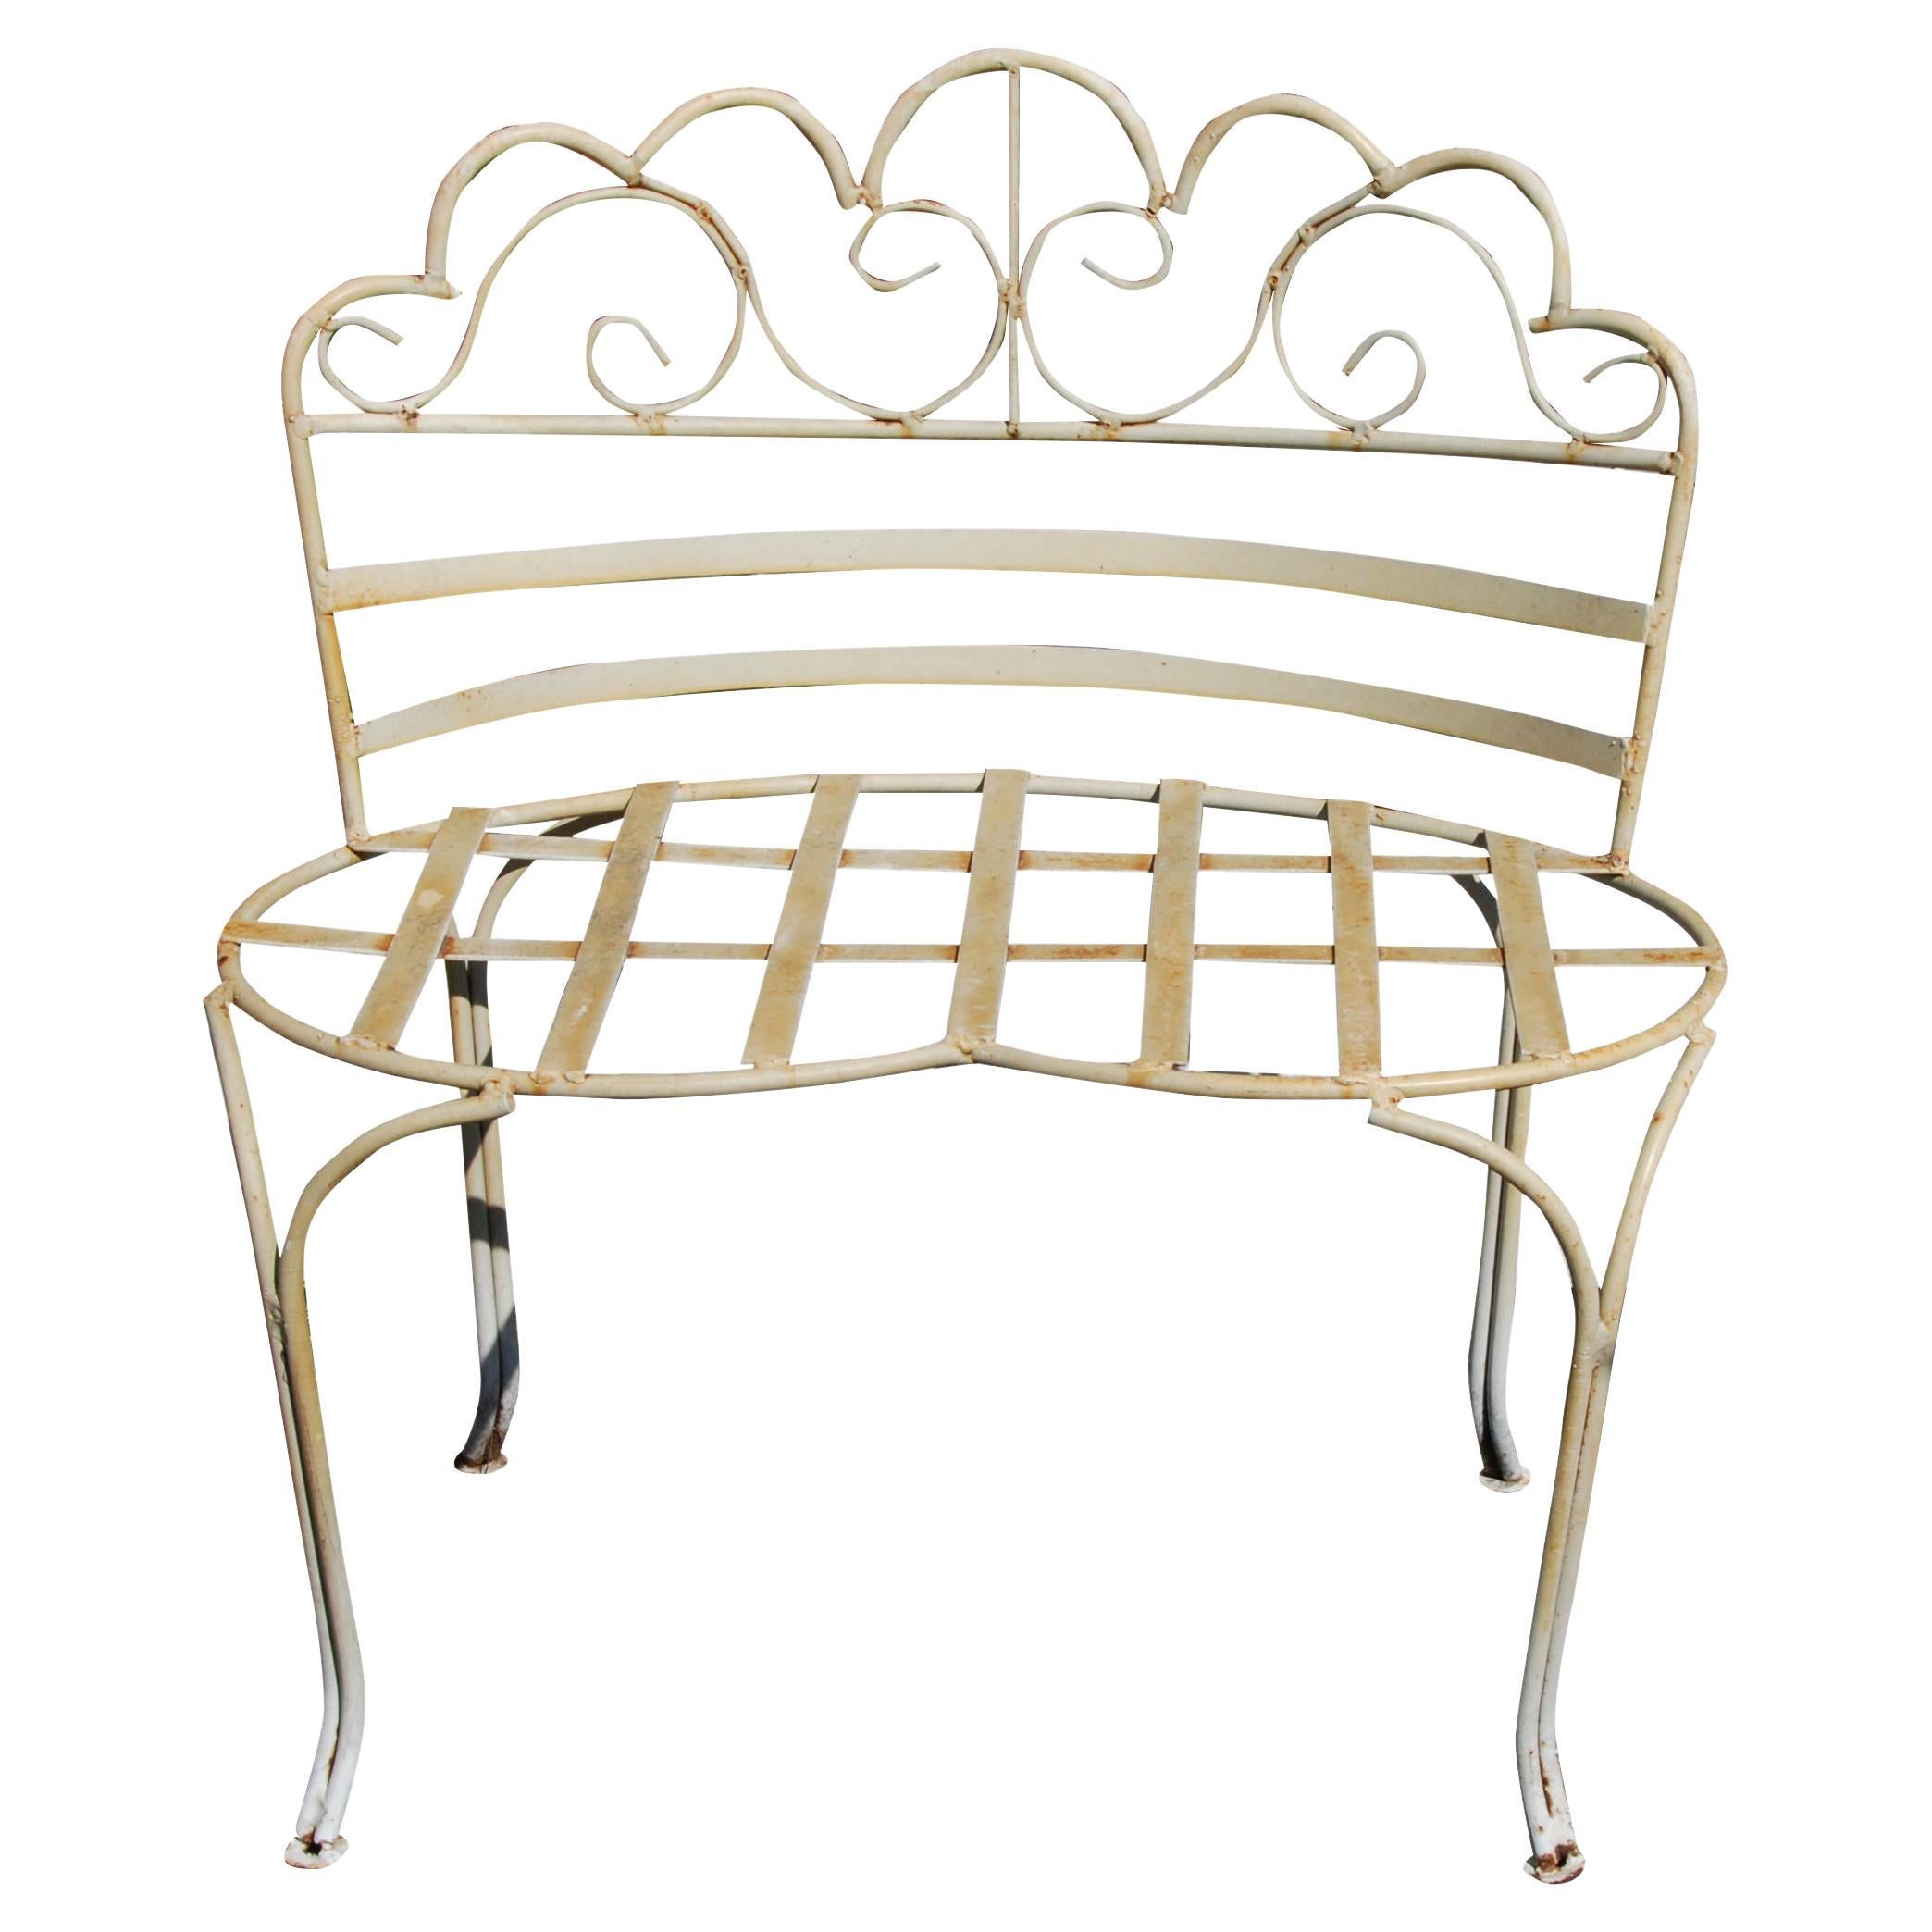 Victorian-Style Wrought Iron Curved Garden Bench

Charming petite wrought iron garden bench with an open and airy design featuring a scalloped, scrolled back and kidney-shaped seat. Rustic original paint finish.